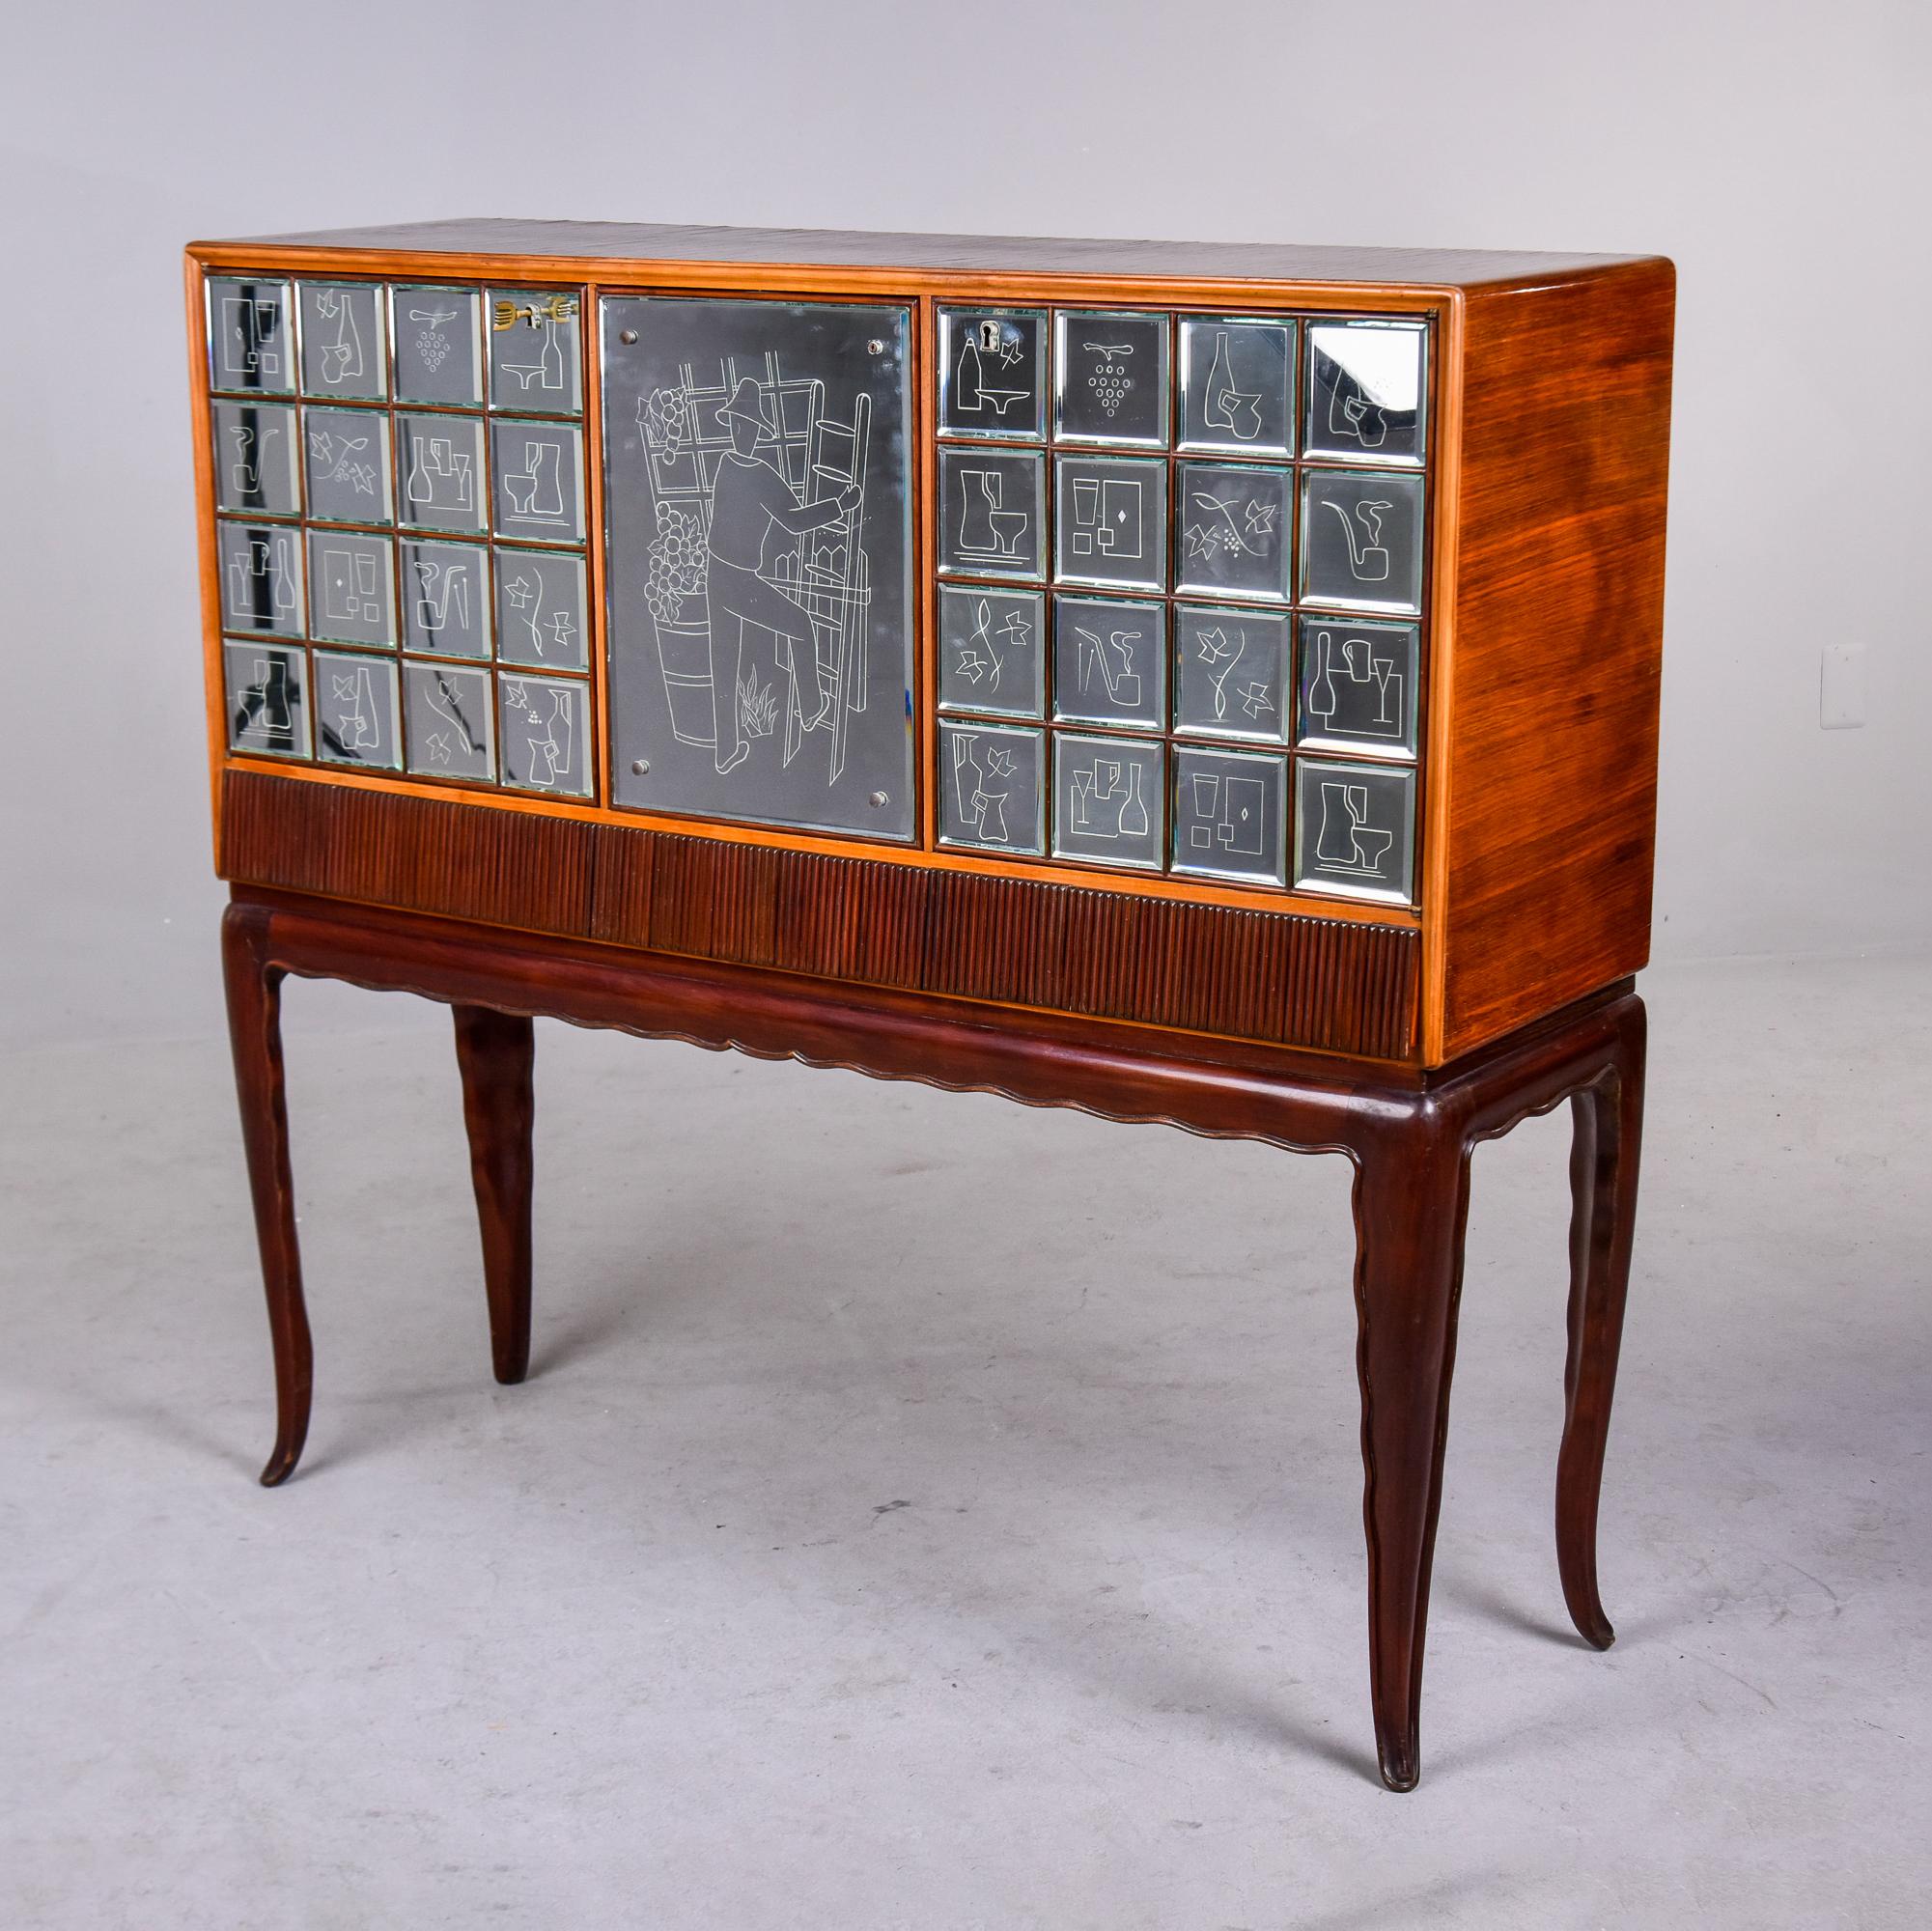 Found in France, this bar or liquor cabinet dates from the late 1940s / early 1950s. Made of mahogany with slender tapered legs, the cabinet has a subtle scalloped apron with reeded detail and three compartments covered in mirrored pieces etched